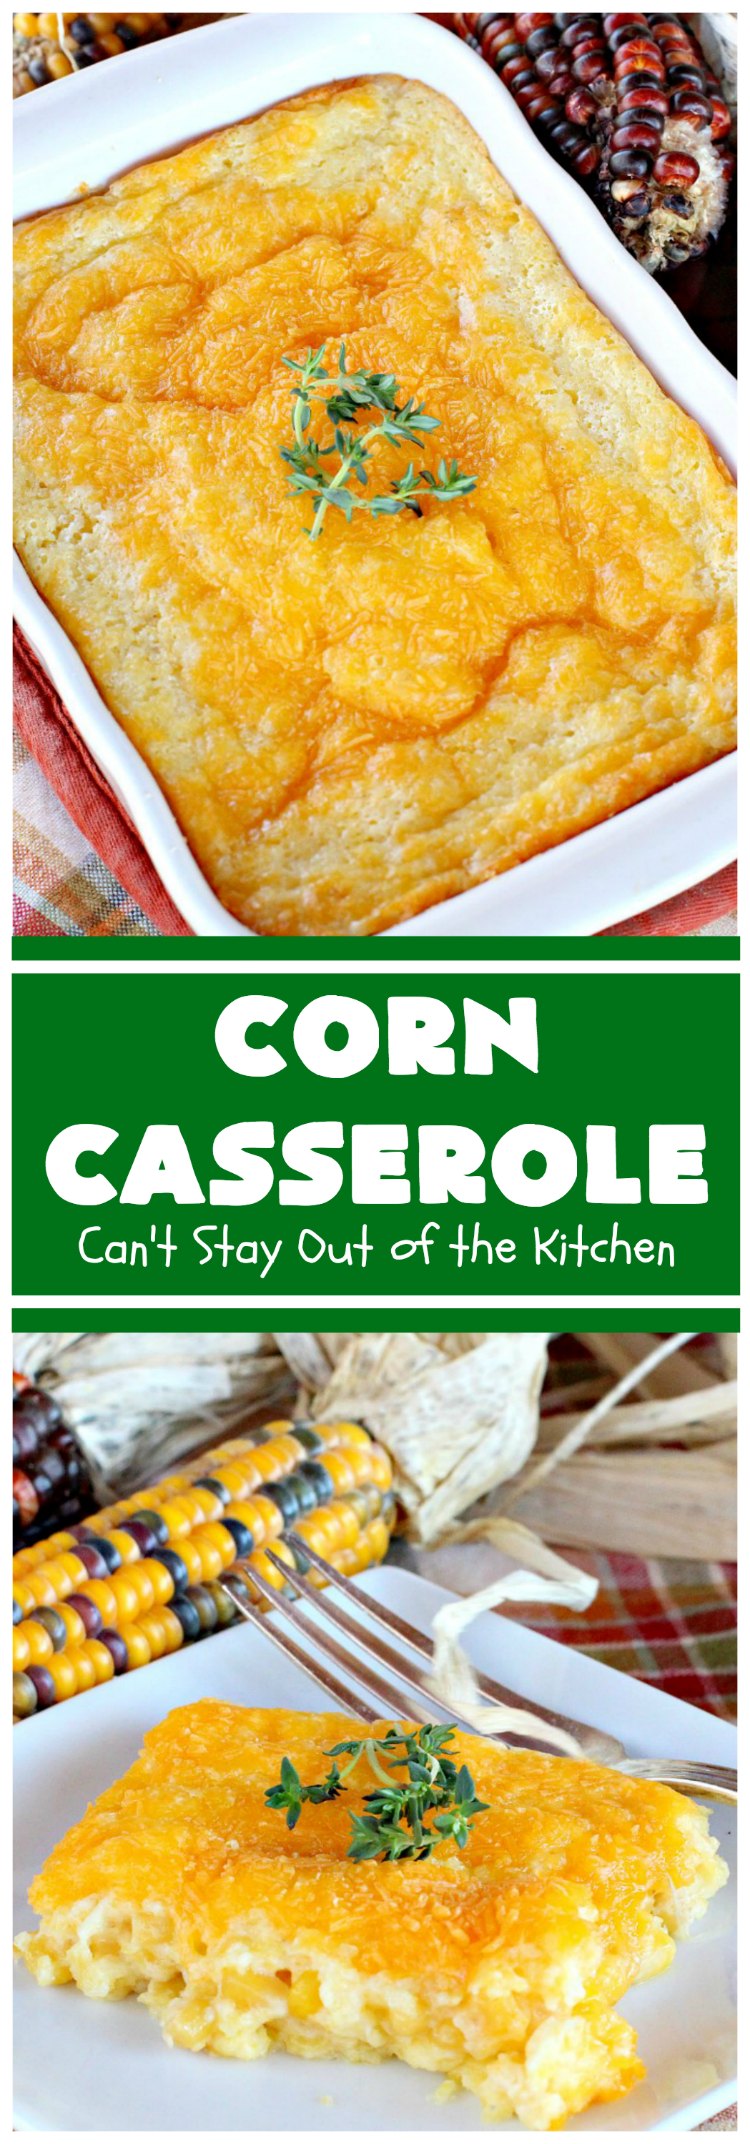 Corn Casserole | Can't Stay Out of the Kitchen